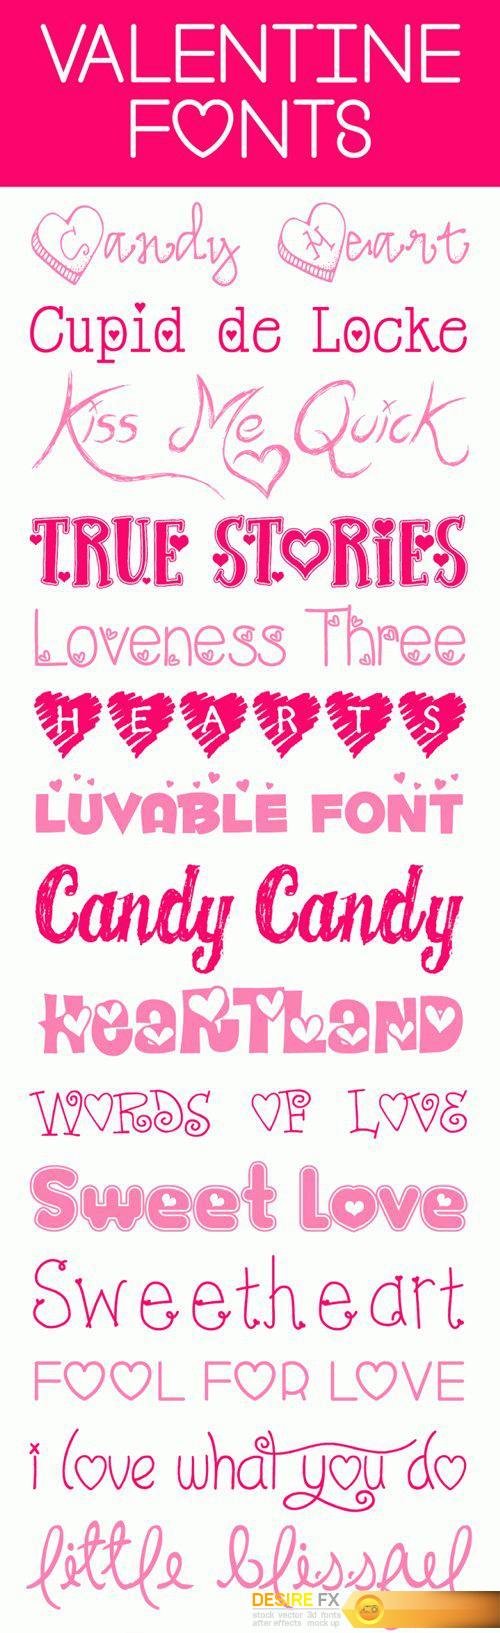 15 Valentines Day Fonts 000015